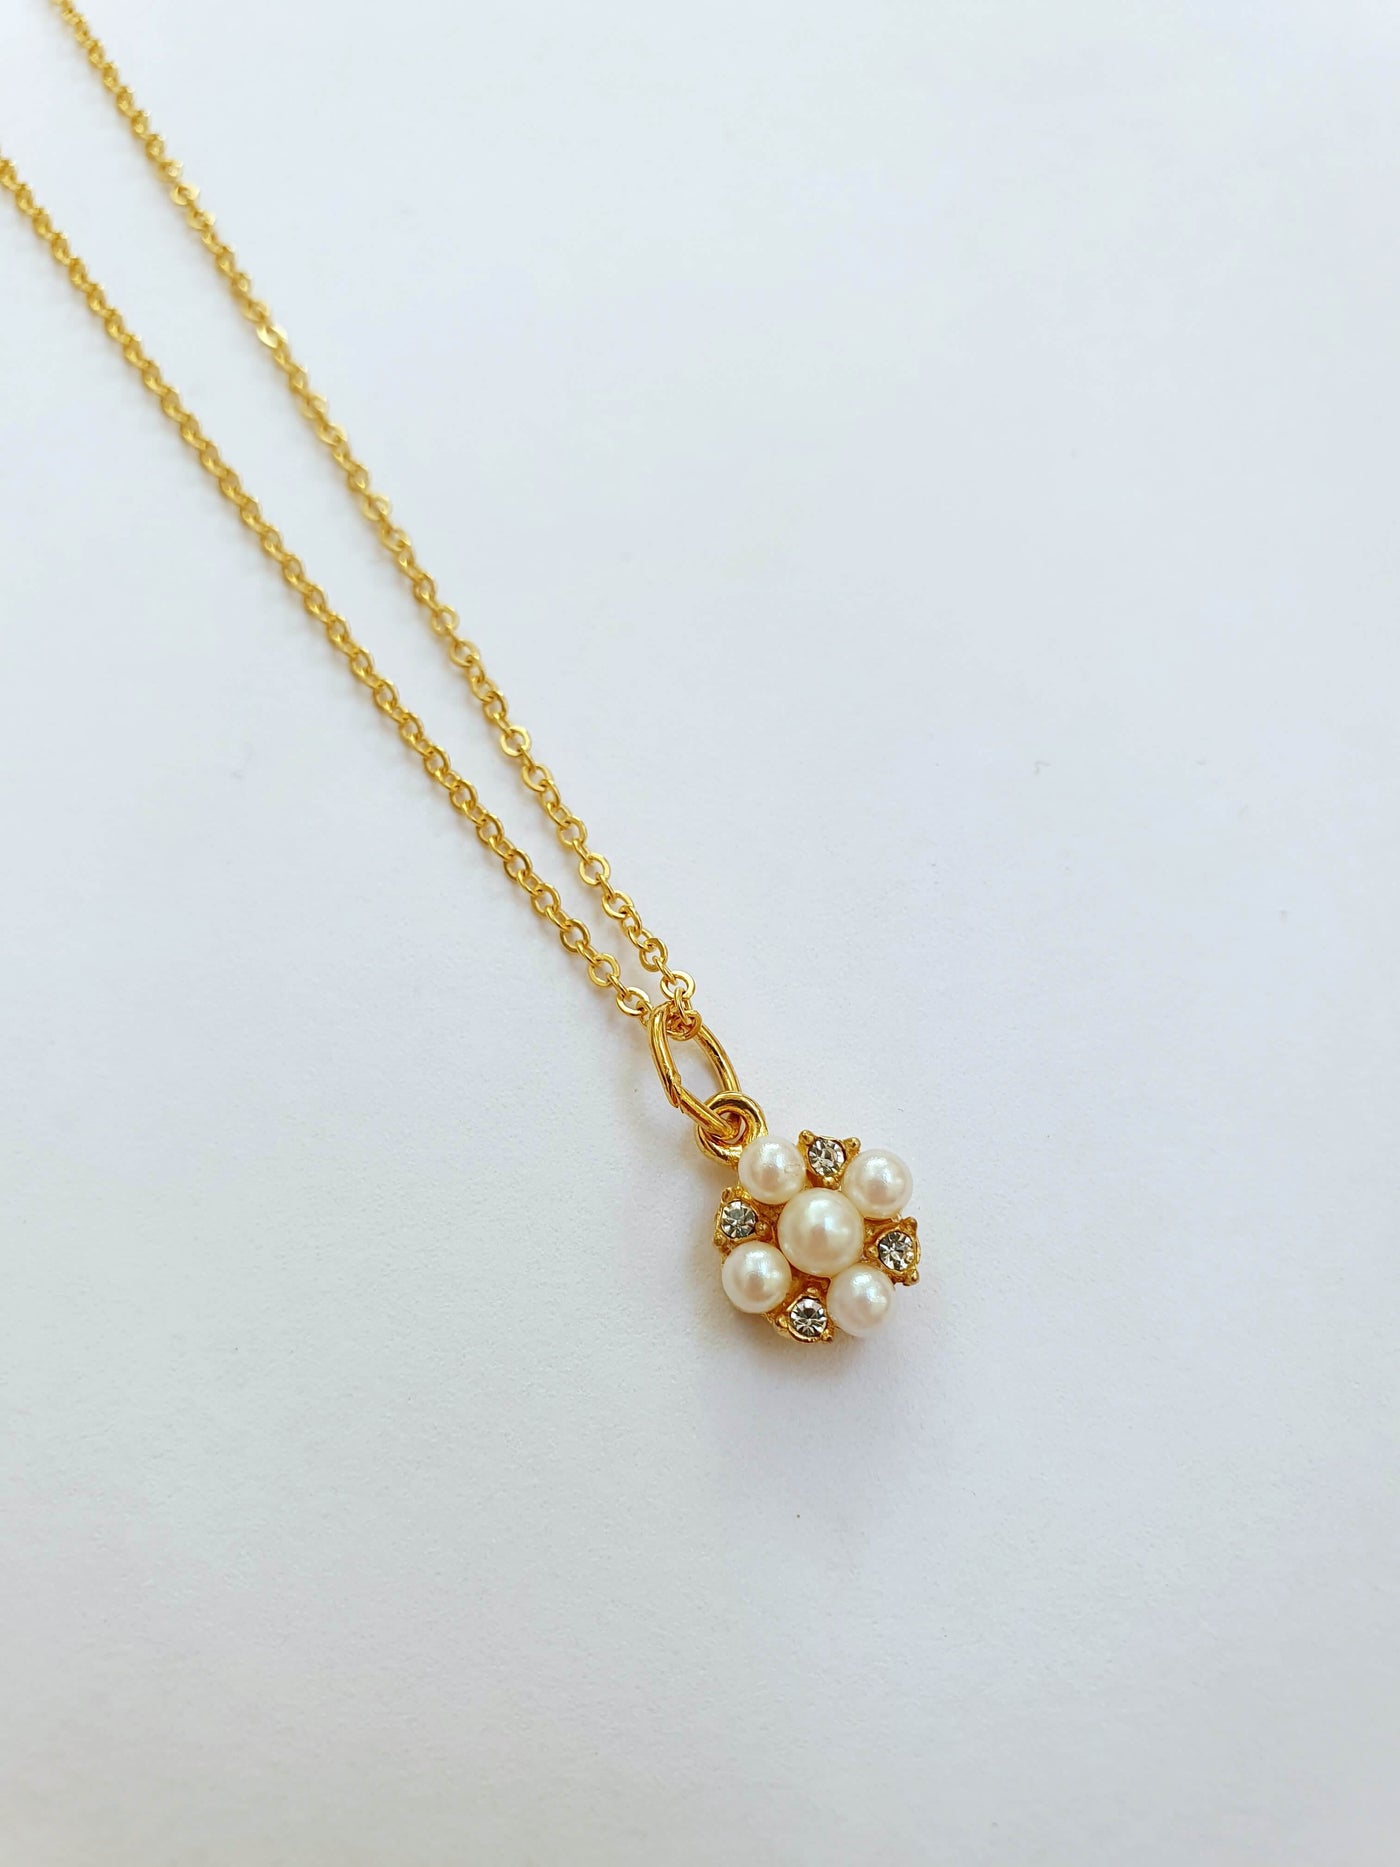 Vintage Gold Plated Fine Chain Necklace with Pearl & Crystal Charm